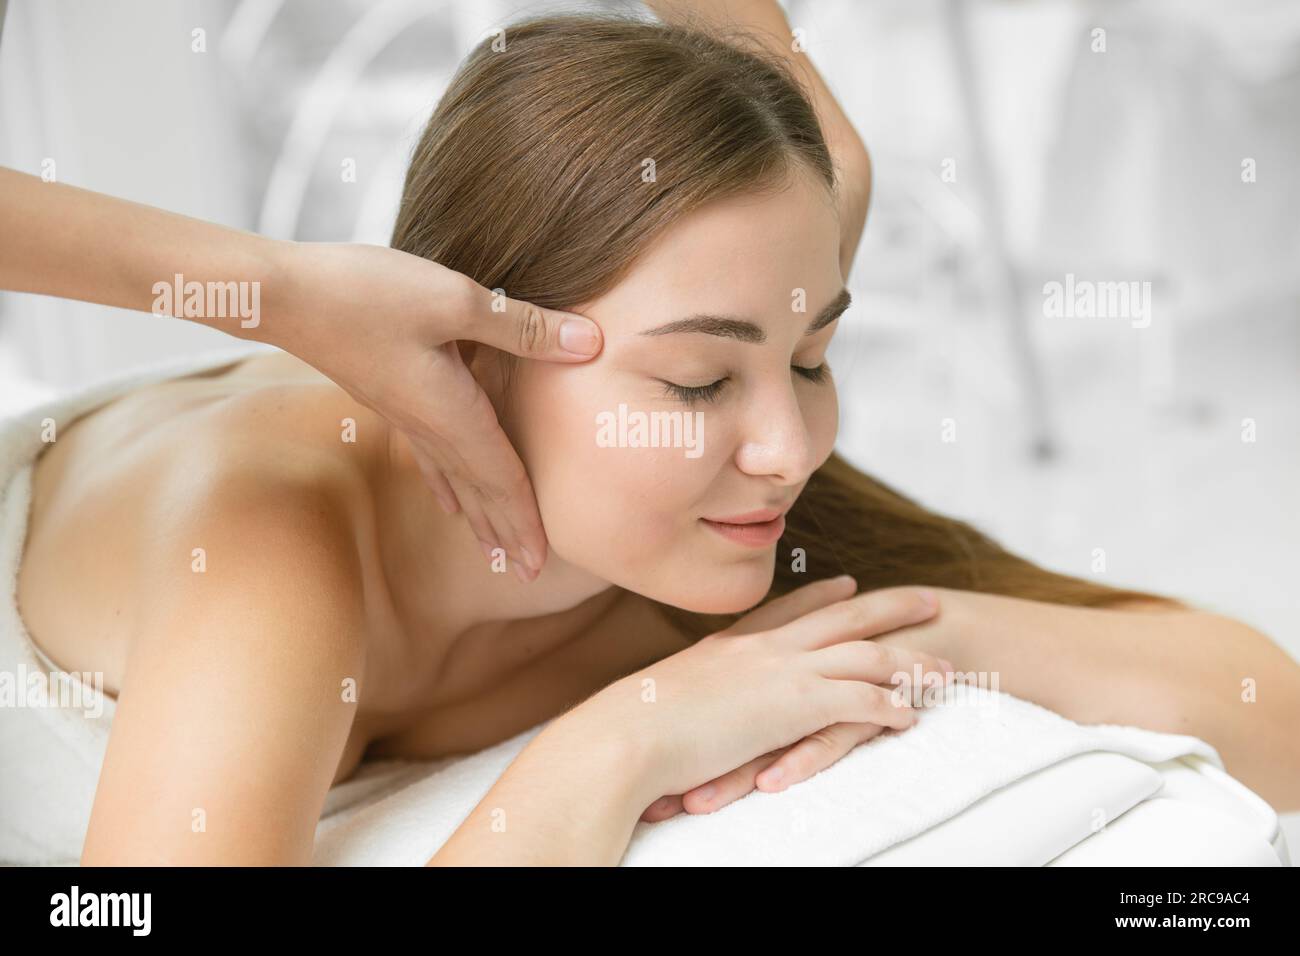 health care beauty women head massage in spa pain relief relax for healthy lifestyle. beautiful lady body care treatment closeup facial. Stock Photo